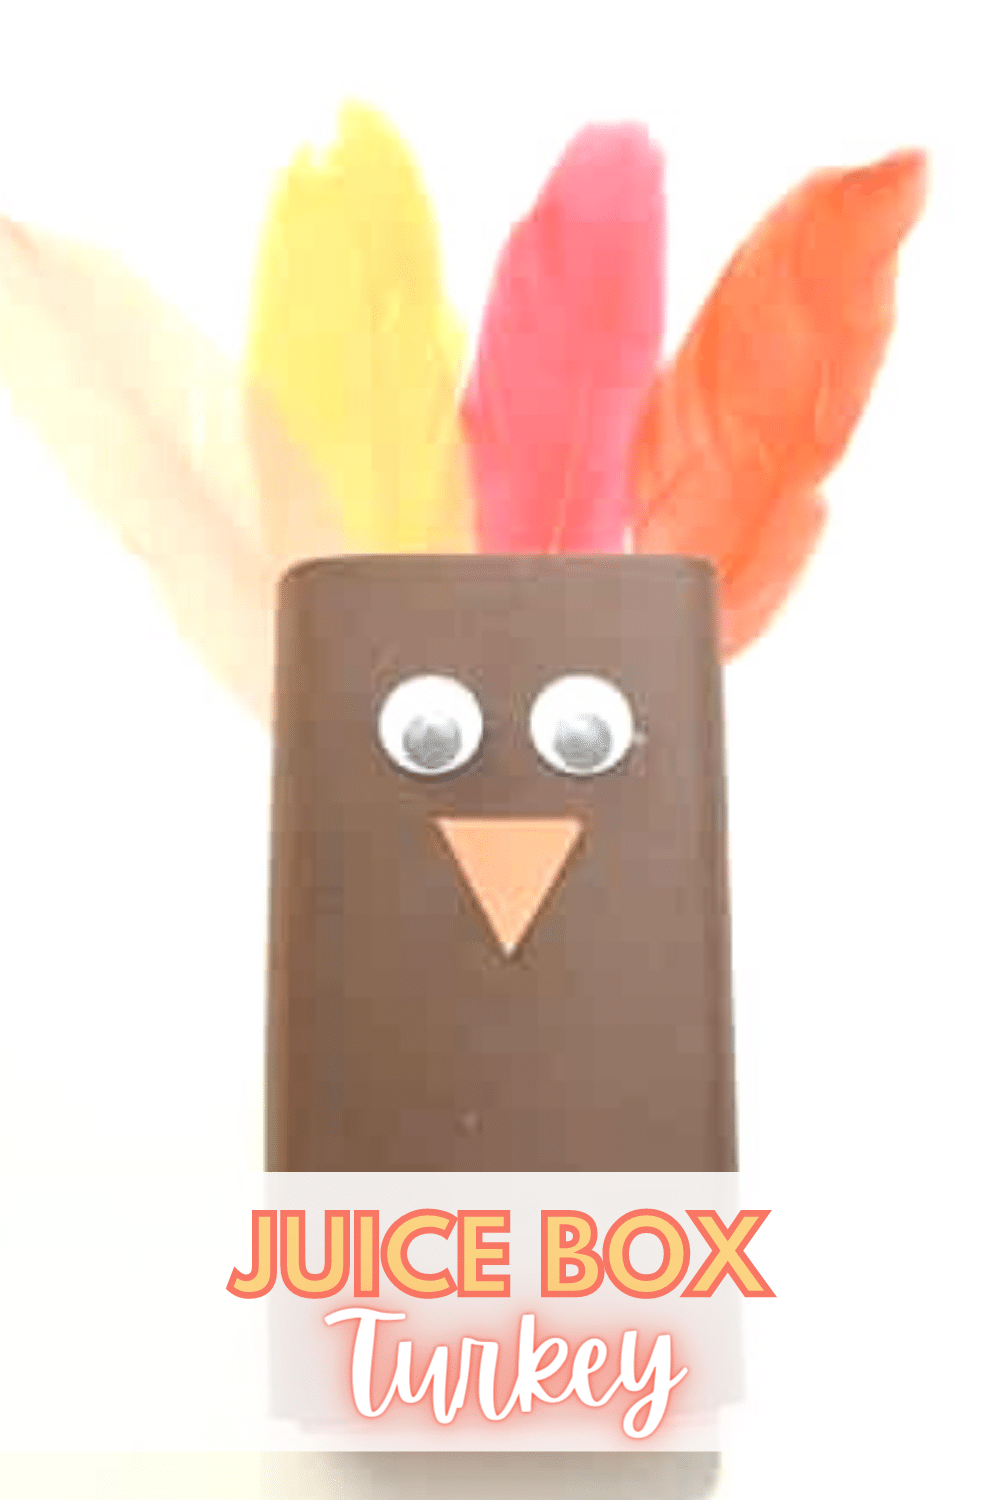 This juice box turkey is a fun way to dress up the drinks for a Thanksgiving party at school or the kids table at your Thanksgiving feast. #thanksgiving #juicebox #craft #forkids via @wondermomwannab